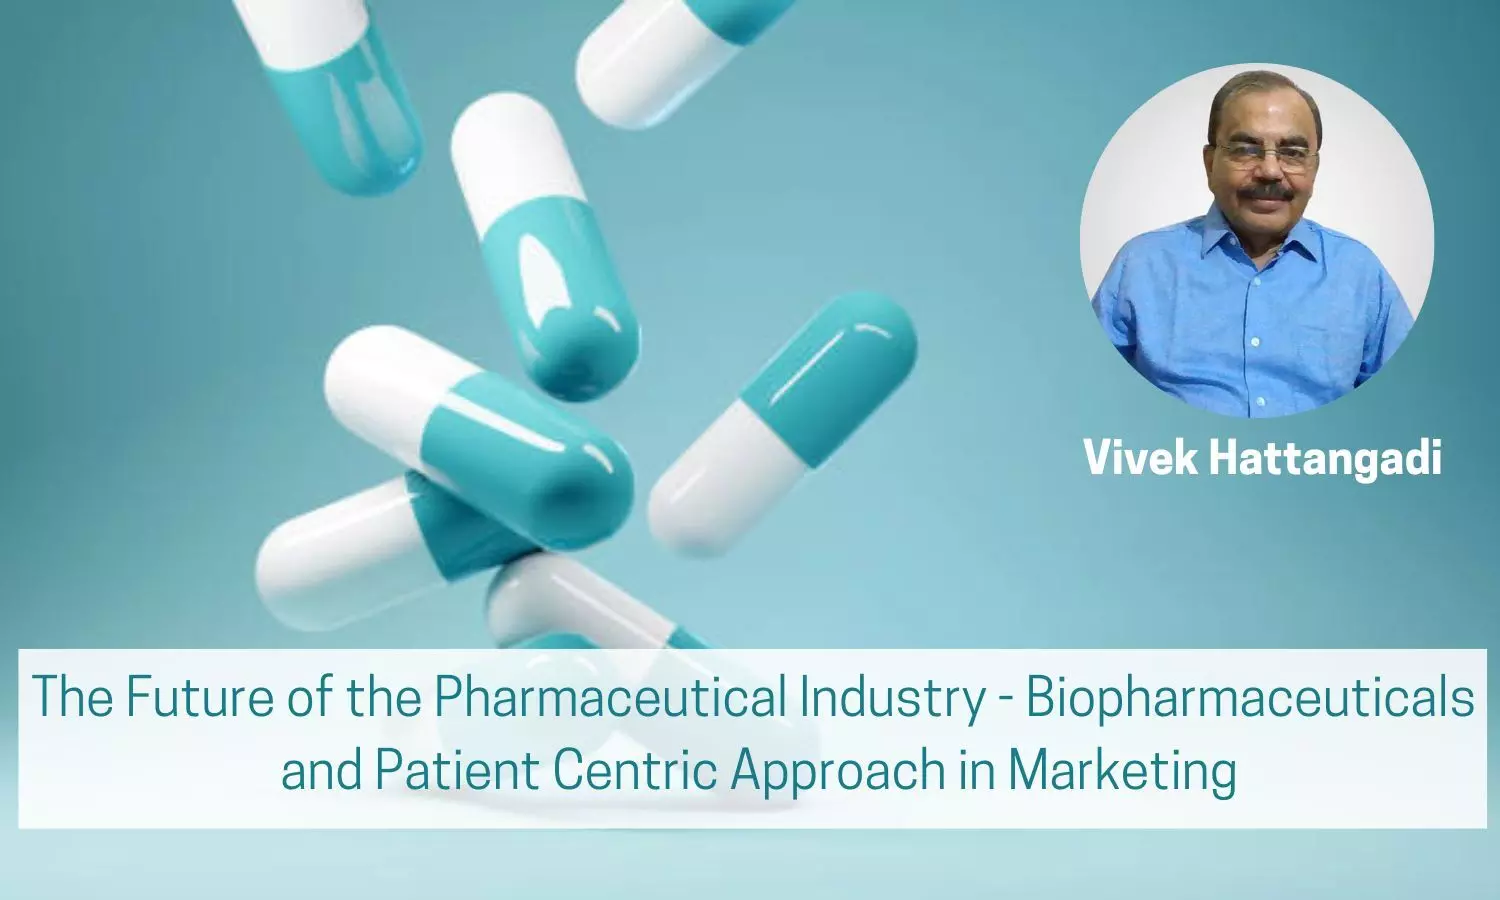 The Future of the Pharmaceutical Industry - Biopharmaceuticals and Patient Centric Approach in Marketing